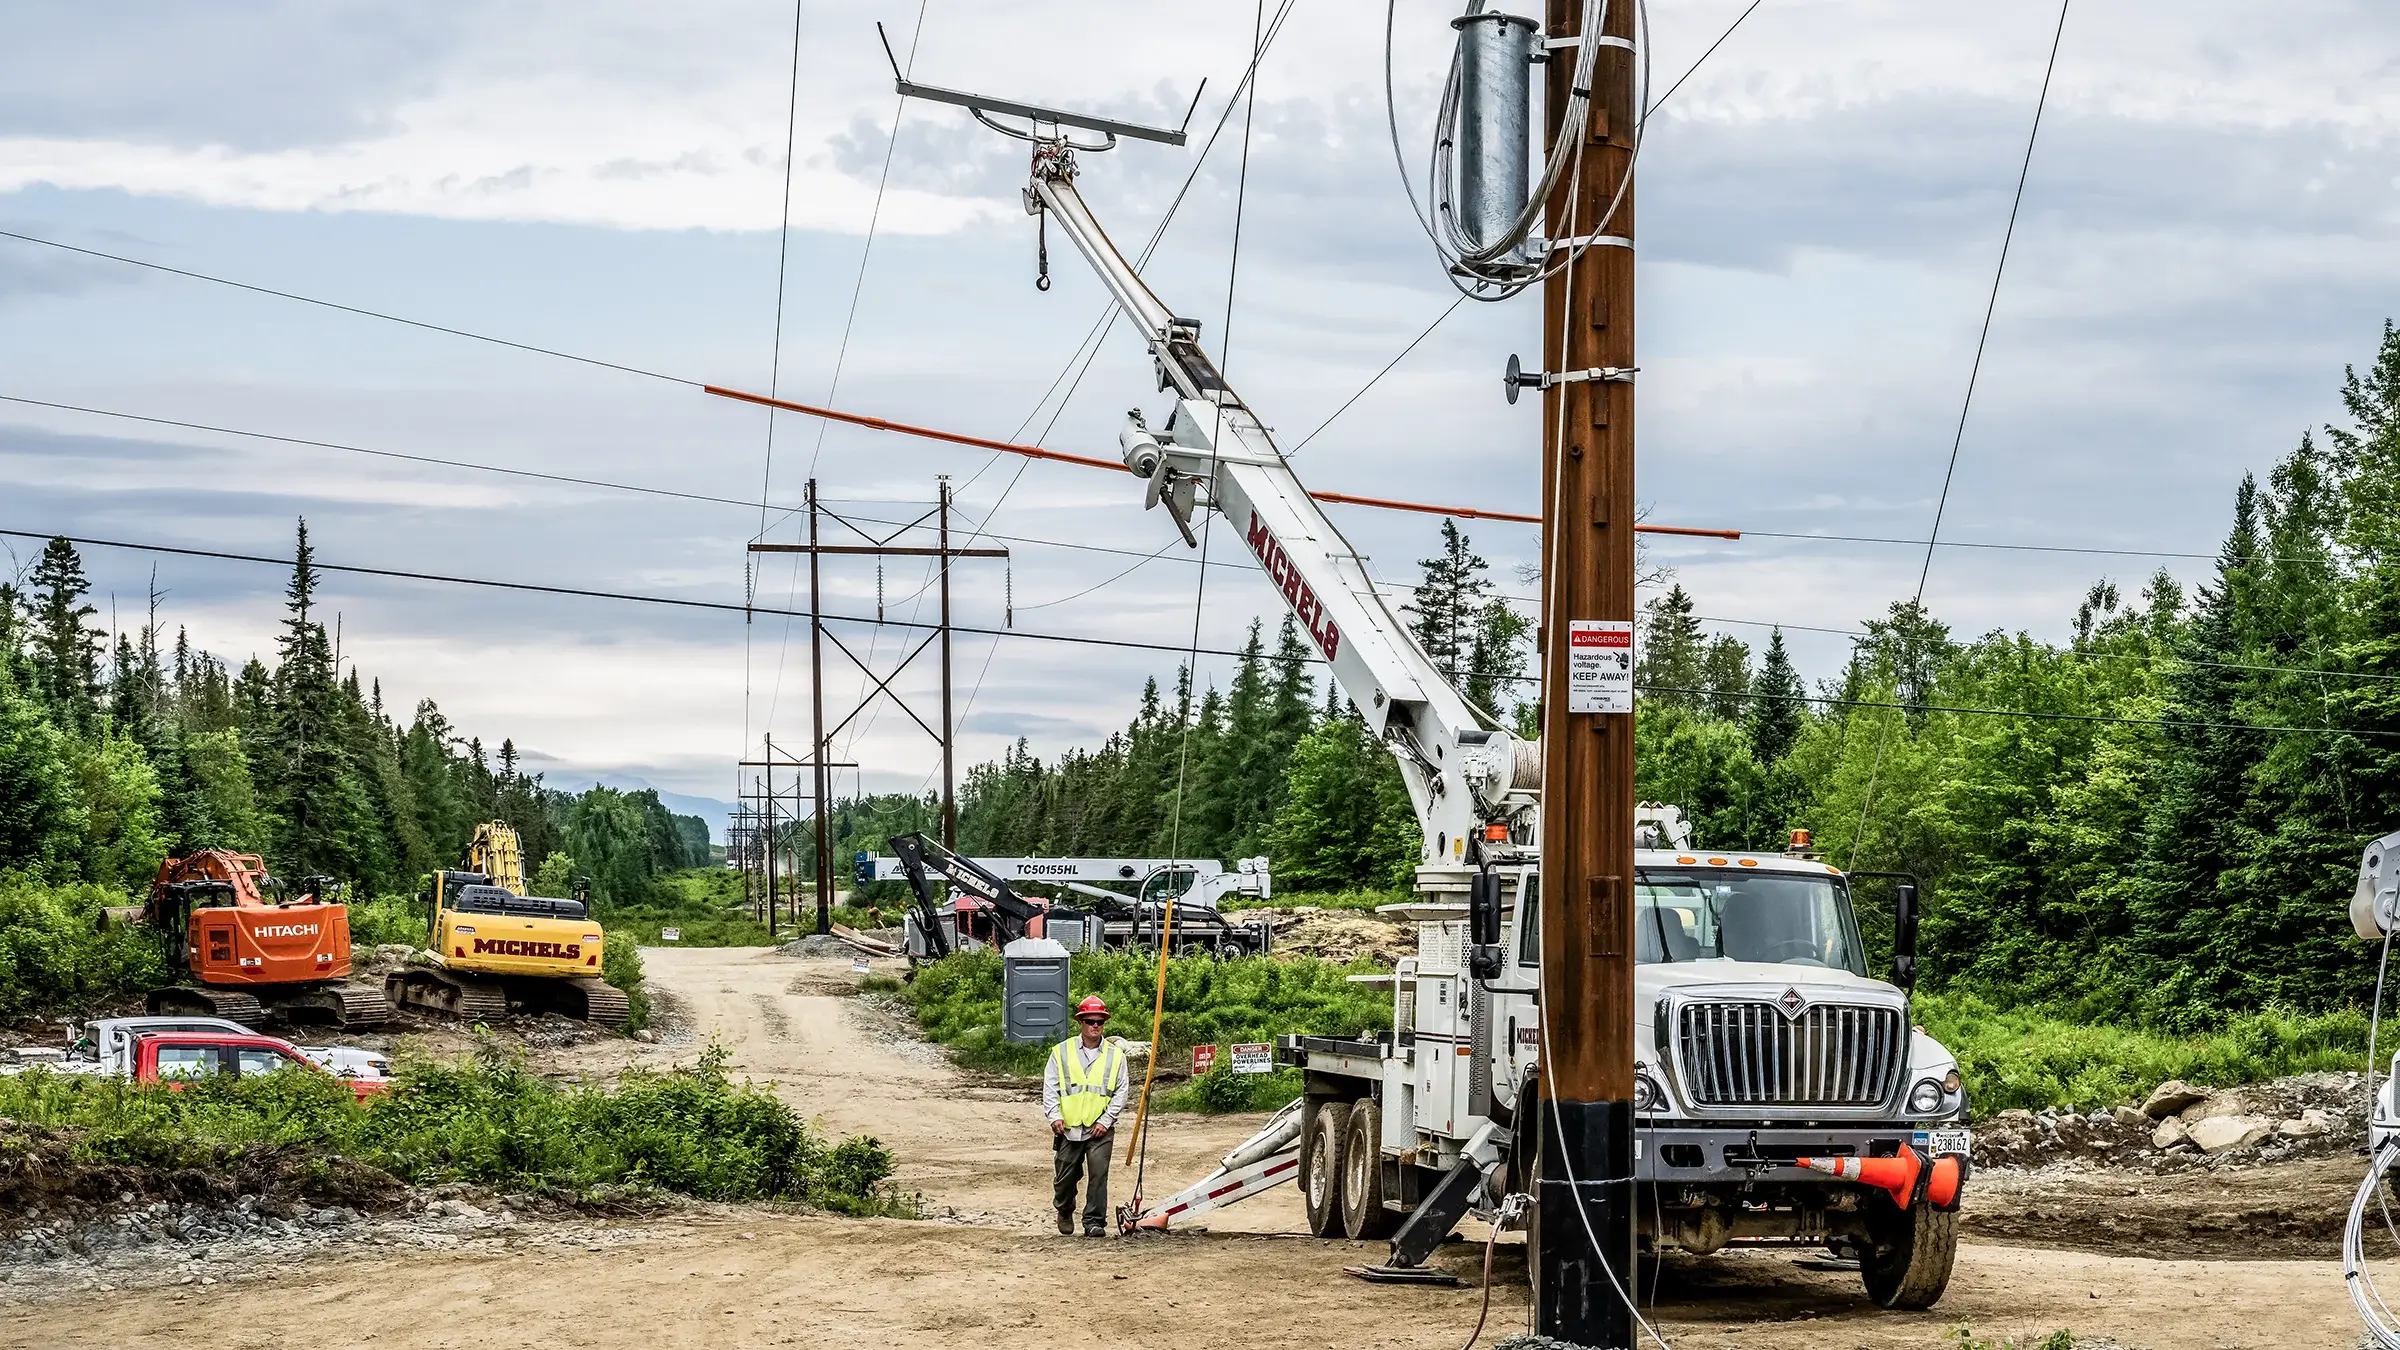 Specialized equipment is used to build a new electrical power transmission line